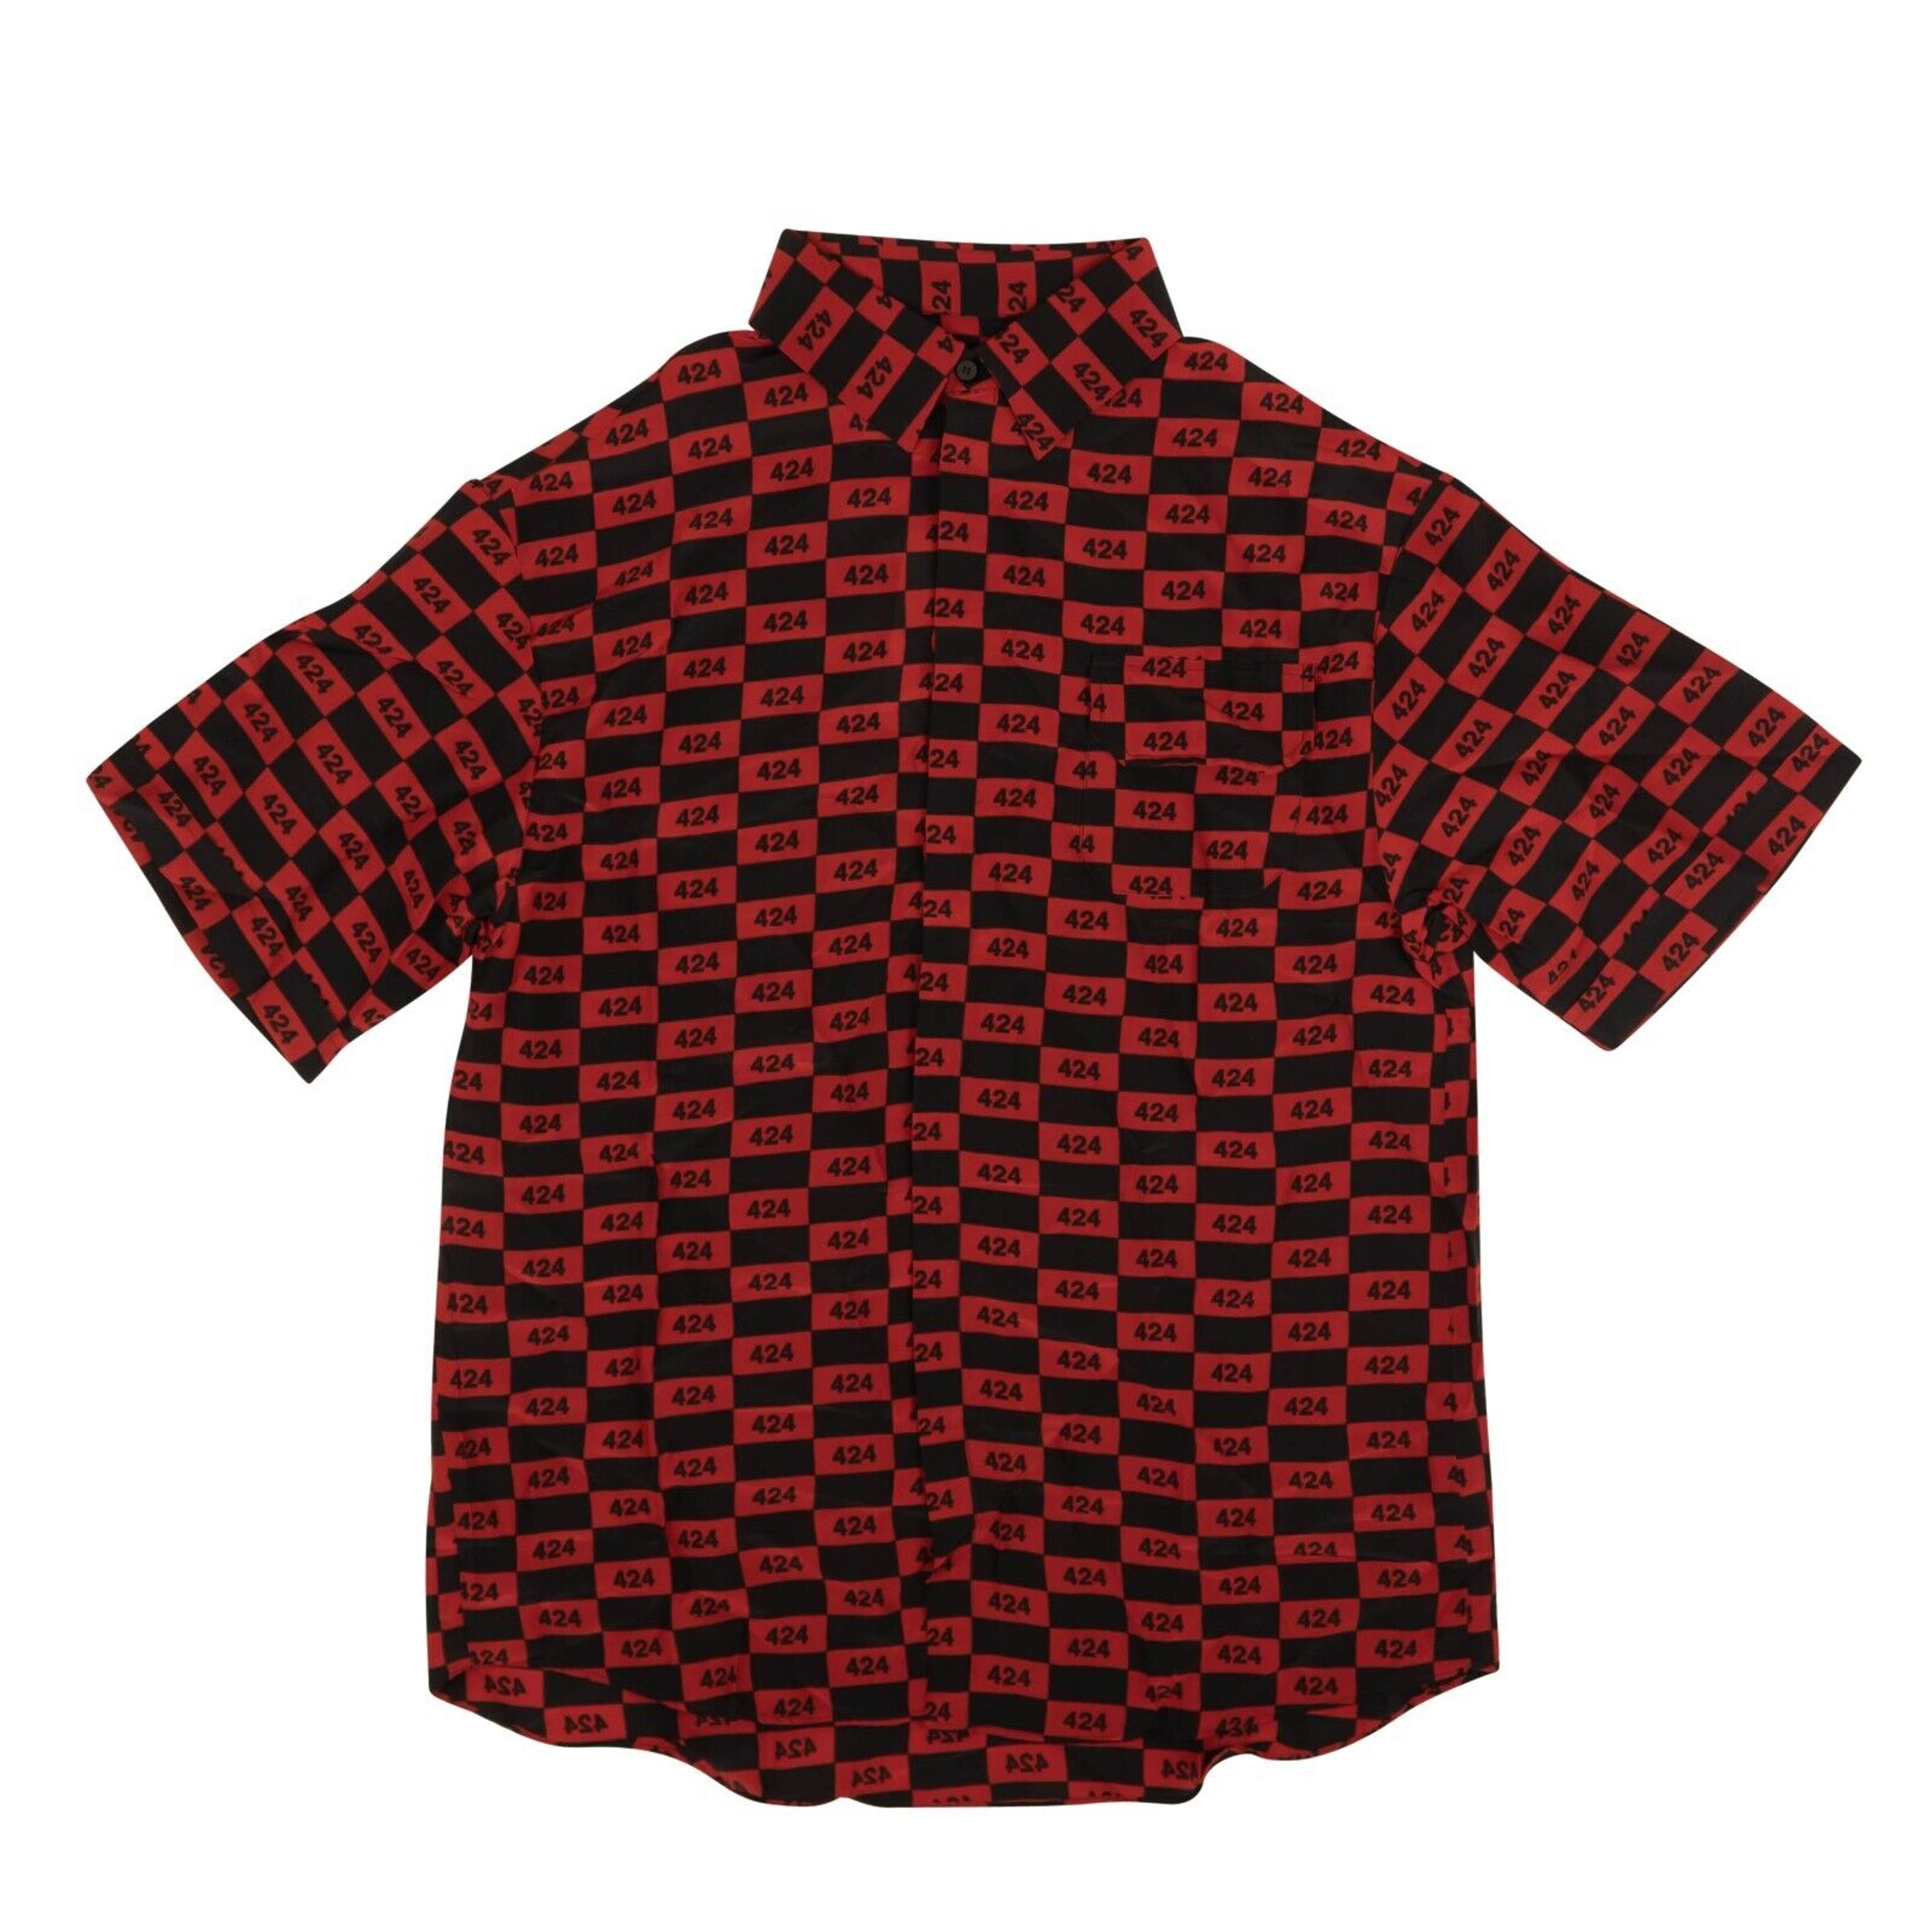 Alternate View 1 of Red And Black Checkered Logo Short Sleeve Shirt